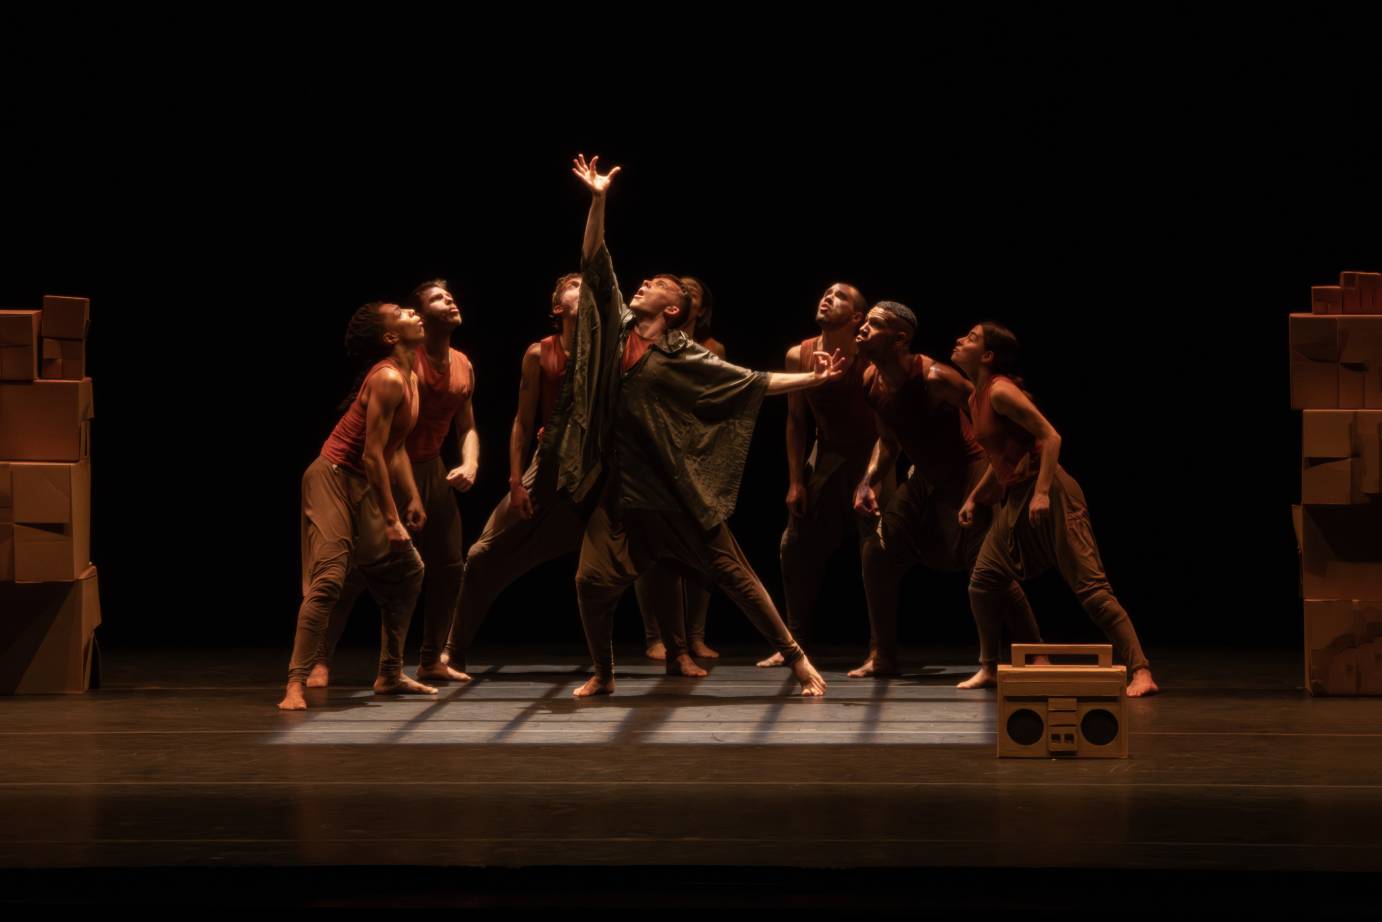 dancers, all wearing versions of orange tops and grey bottoms surround a central figure who is reaching up toward a light. The group is flanked by cardboard boxes. and in front of them is a boom box made of cardboard.